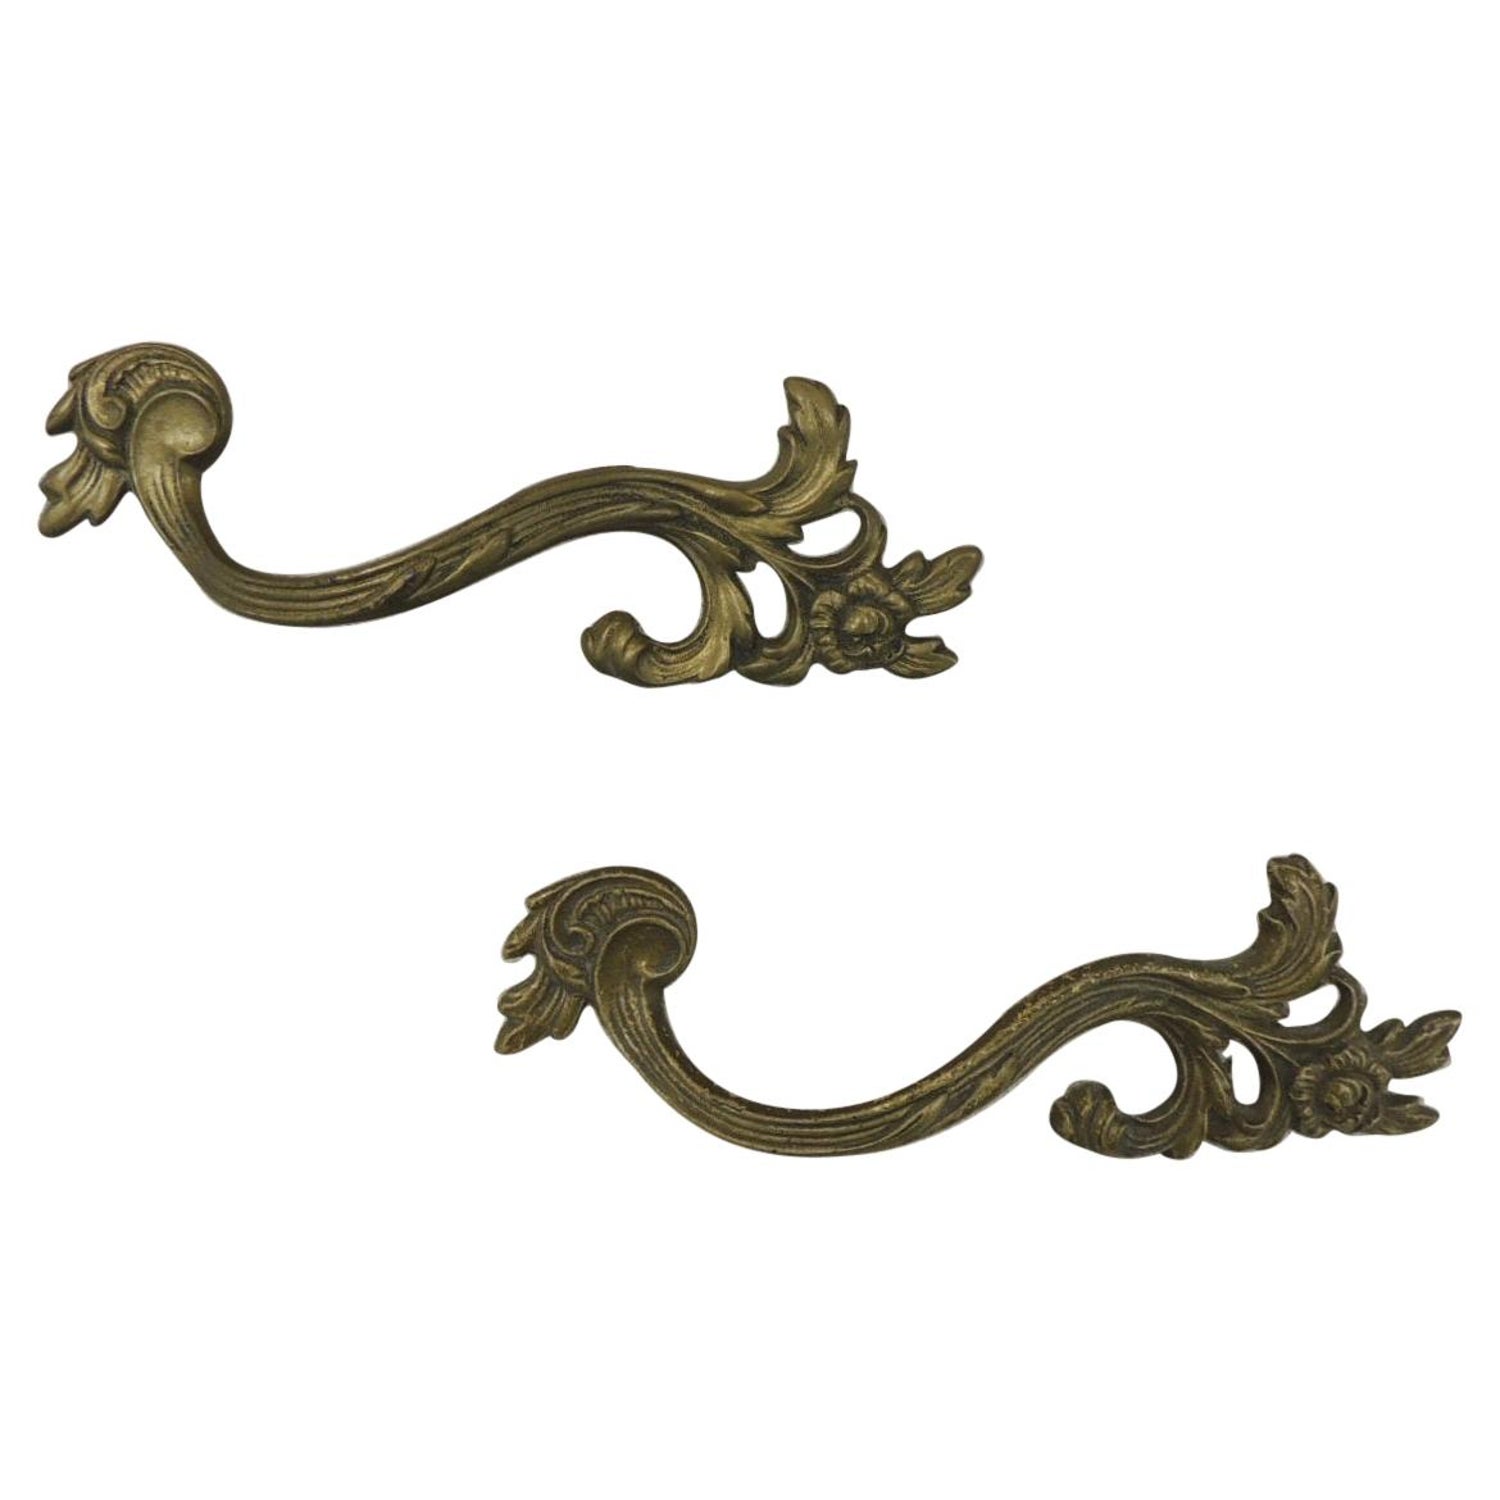 Pair Vtg French Provincial Rococo Drawer Pulls Handles w/ Screws Gold Finish